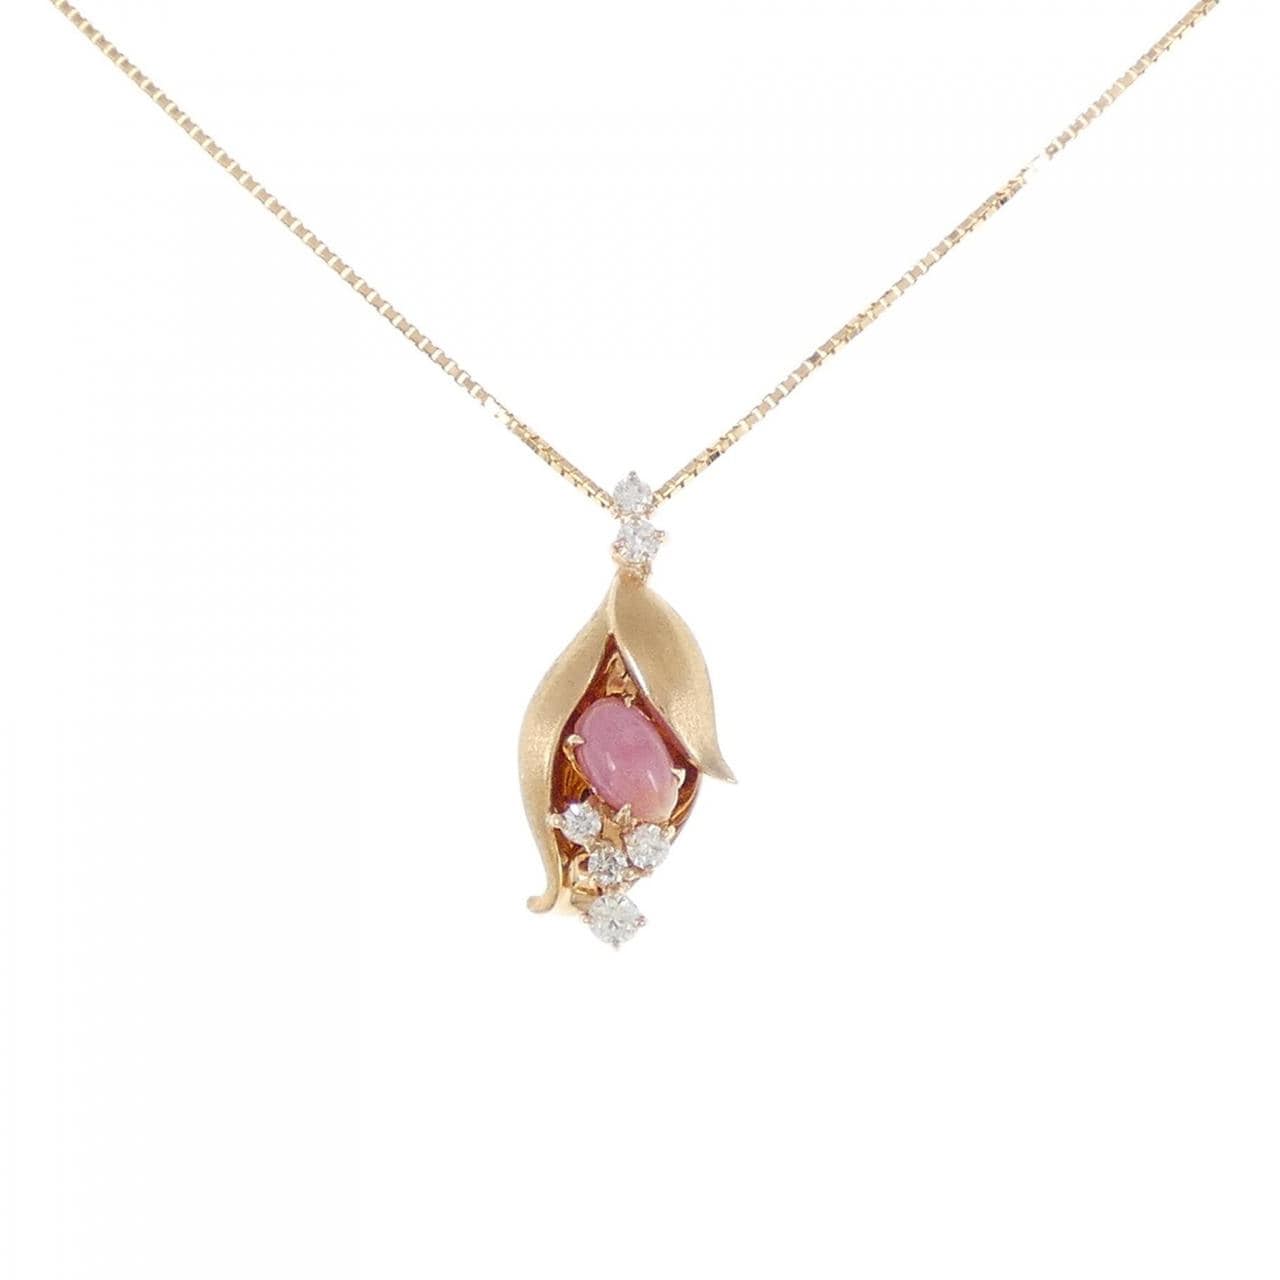 K18PG Conch Pearl Necklace 0.79CT